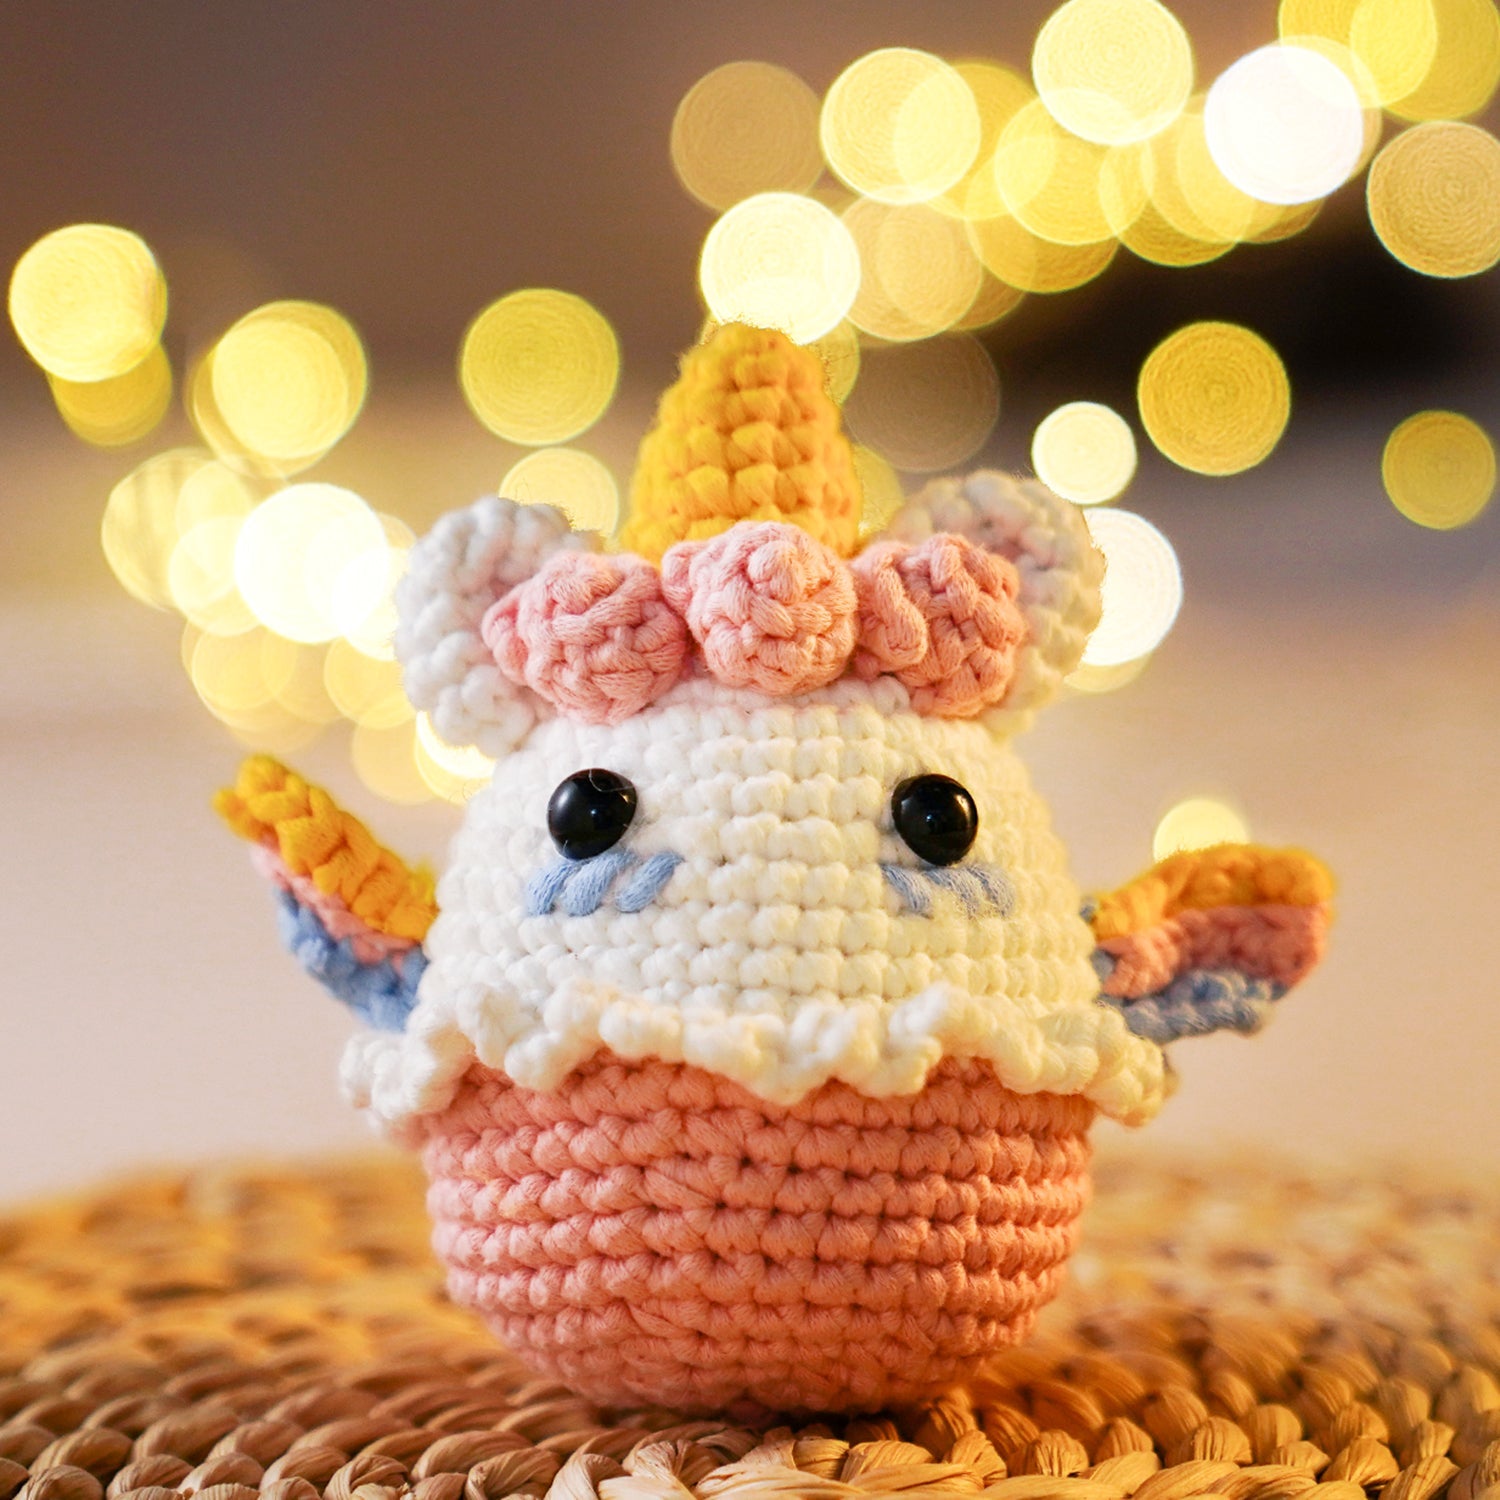 Crochet Kit for Beginners Adults, Crochet Starter Kit, Animal Amigurumi, Step-by-Step Video Tutorial, All You Need in, Cute Unicorn Design, Birthday, Holiday Thanksgiving Gift for Freinds, Teens